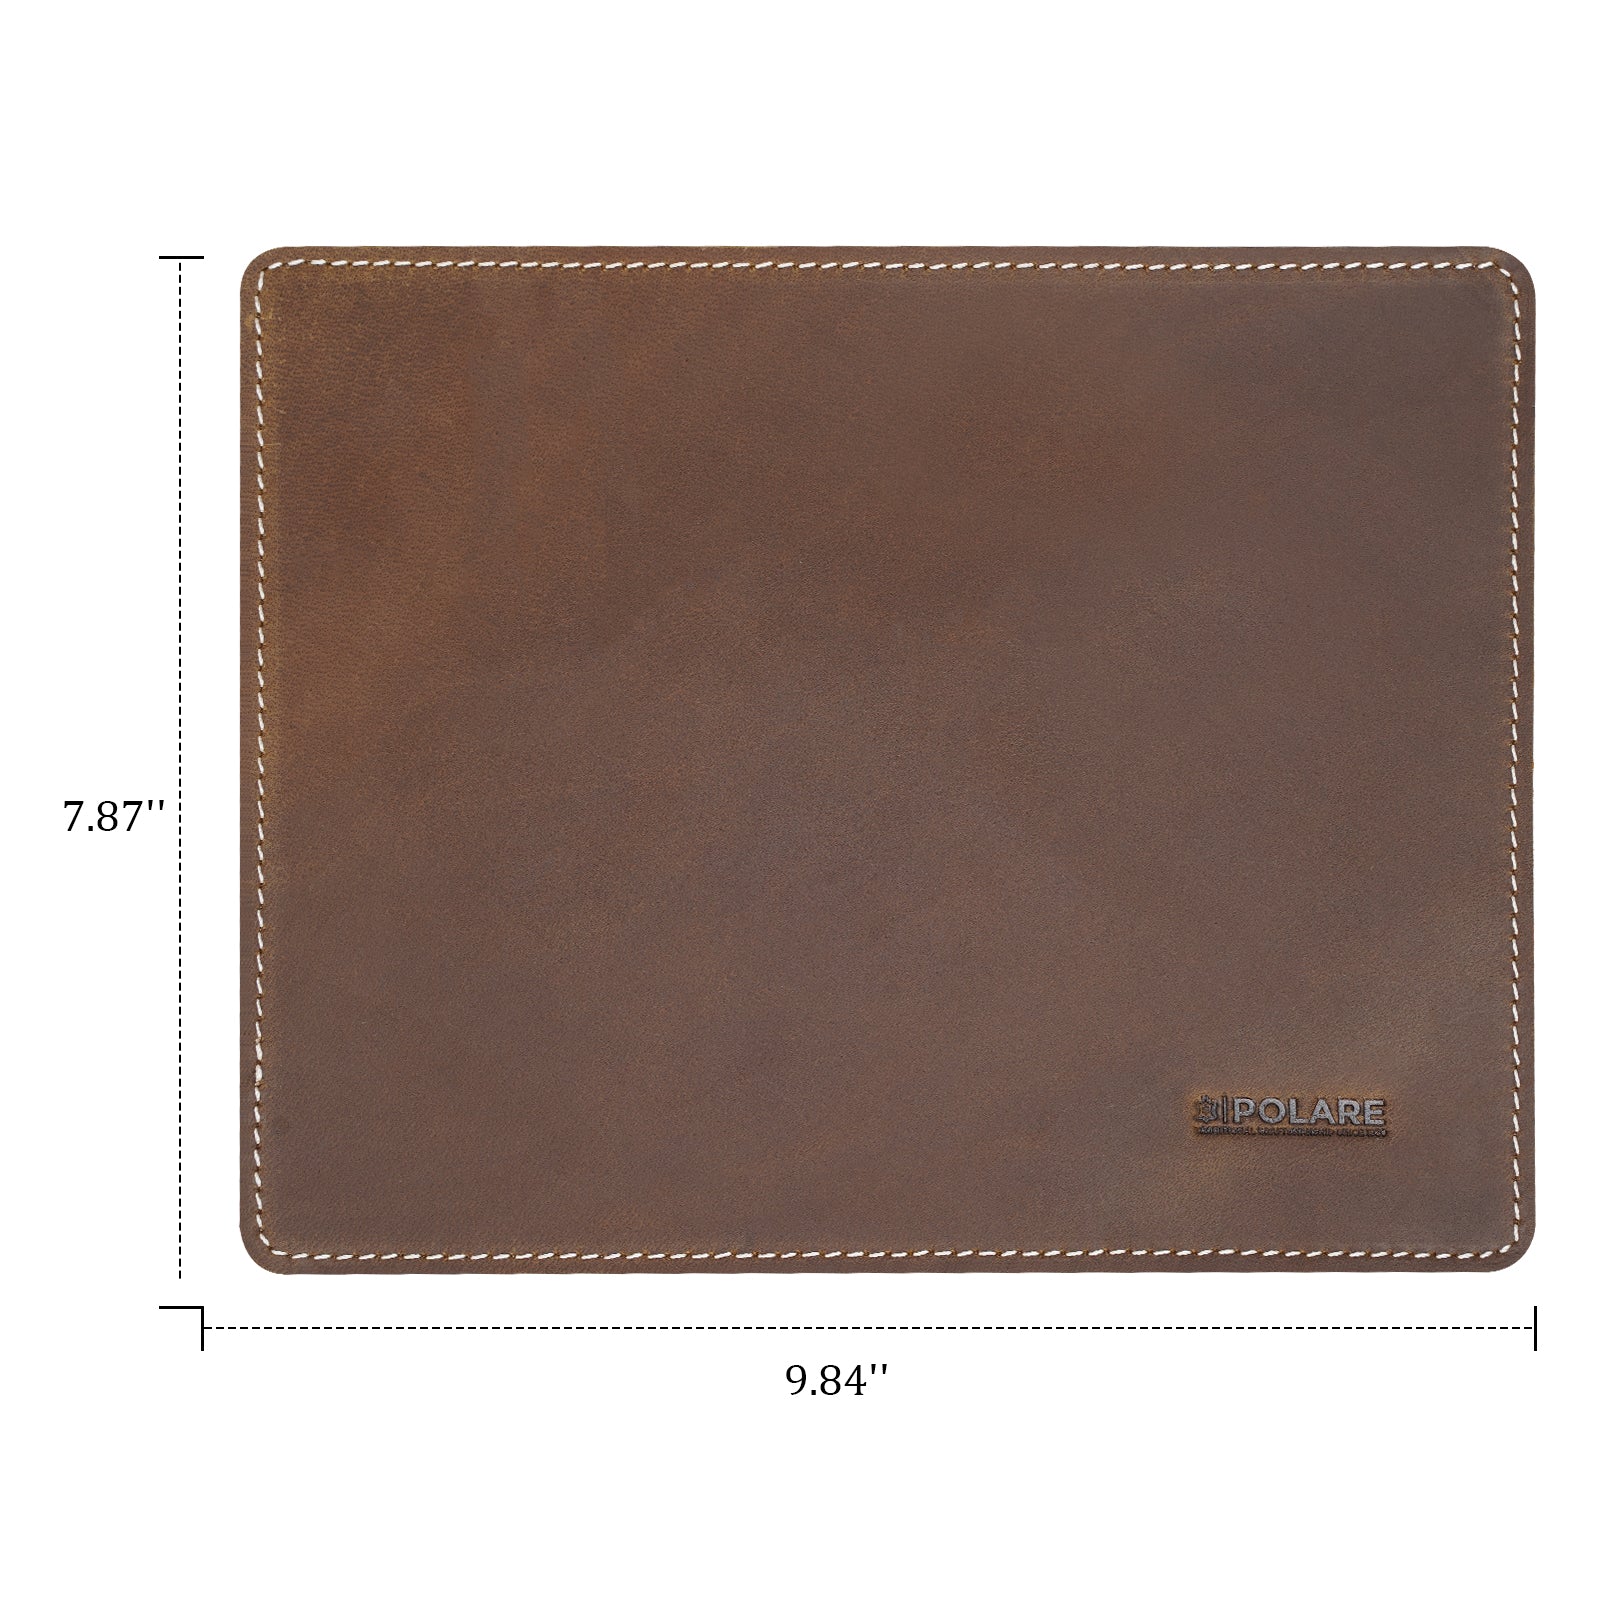 Polare 2mm Thick Full Grain Leather Desk Pad Protector 31.5 x 15.7 inch  Desktop Blotter Mats for Keyboard and Mouse Non-Slip Desk Writing Pad for